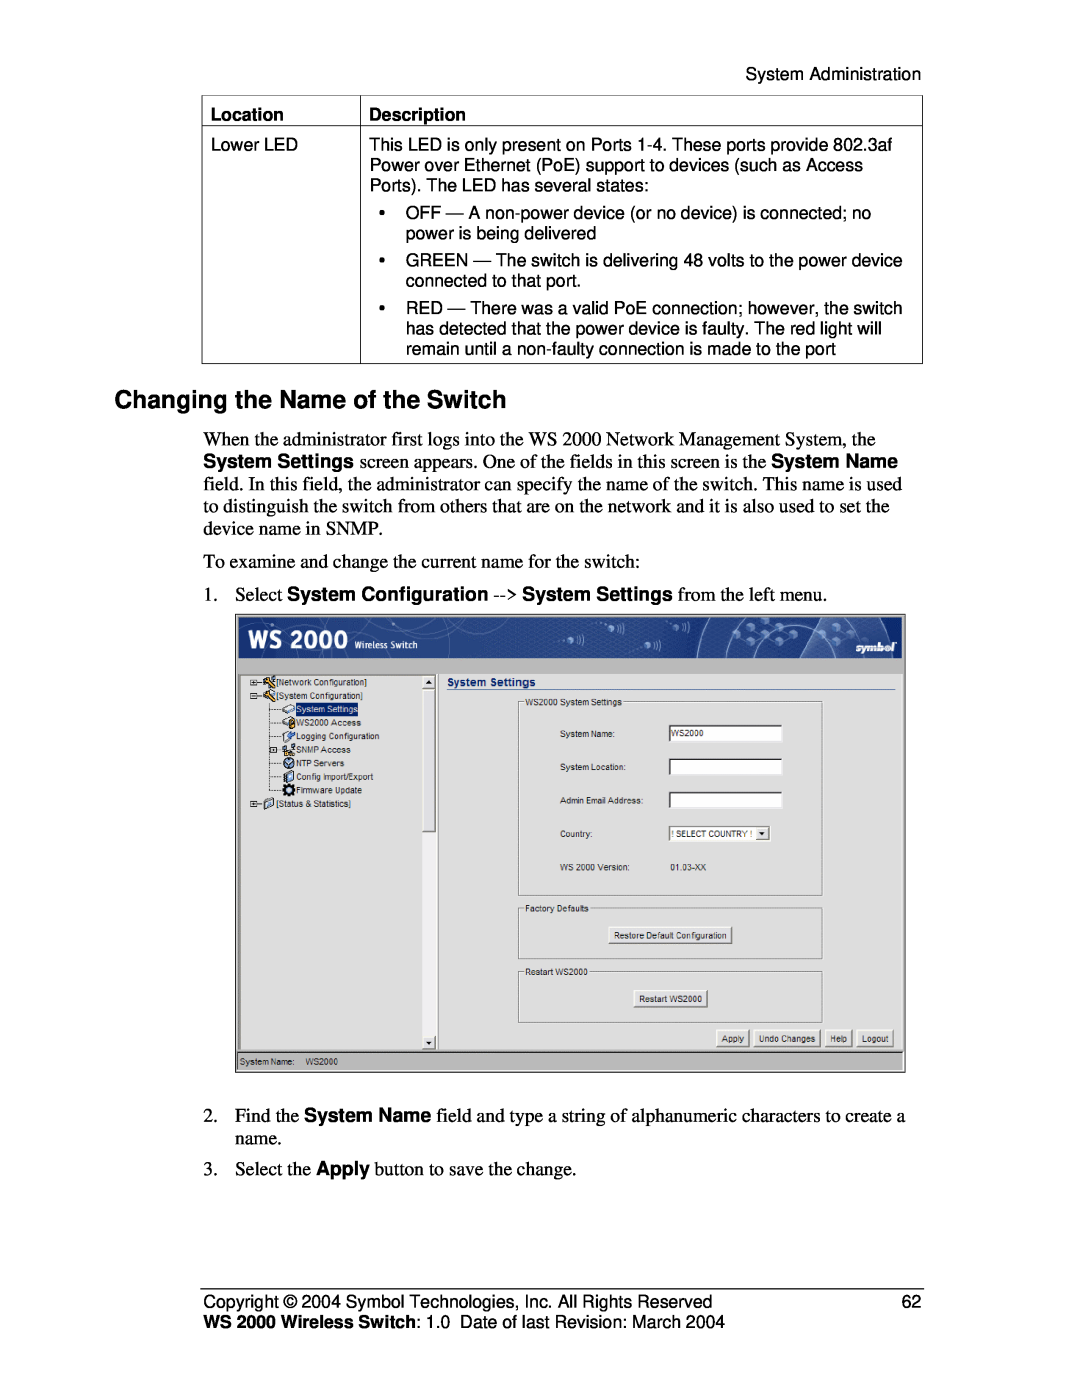 Symbol Technologies WS 2000 manual Changing the Name of the Switch 